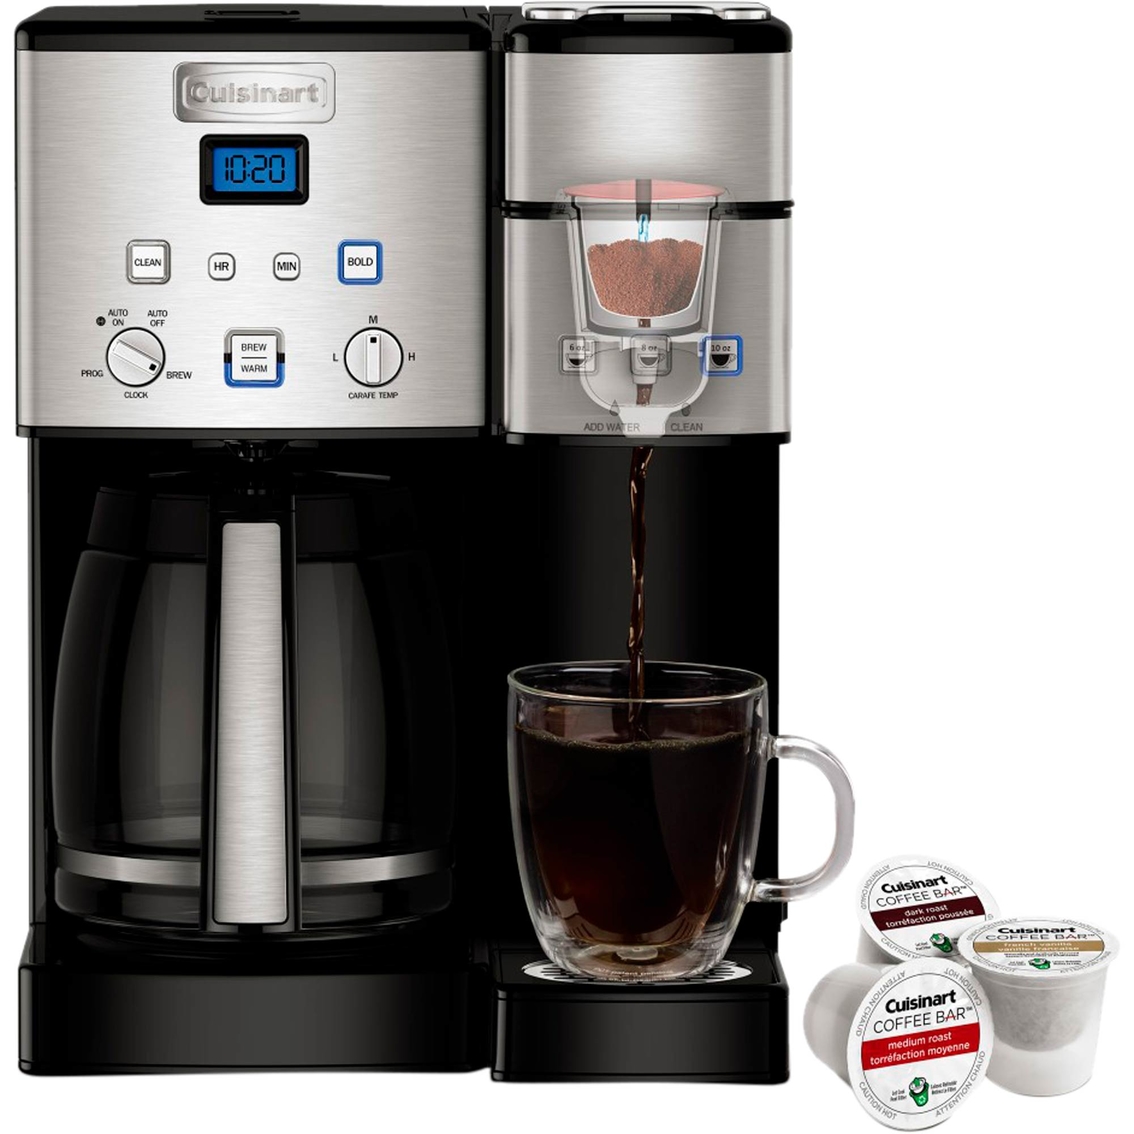 Cuisinart Coffee Center 12 Cup Coffeemaker and Single-Serve Brewer - Image 3 of 6